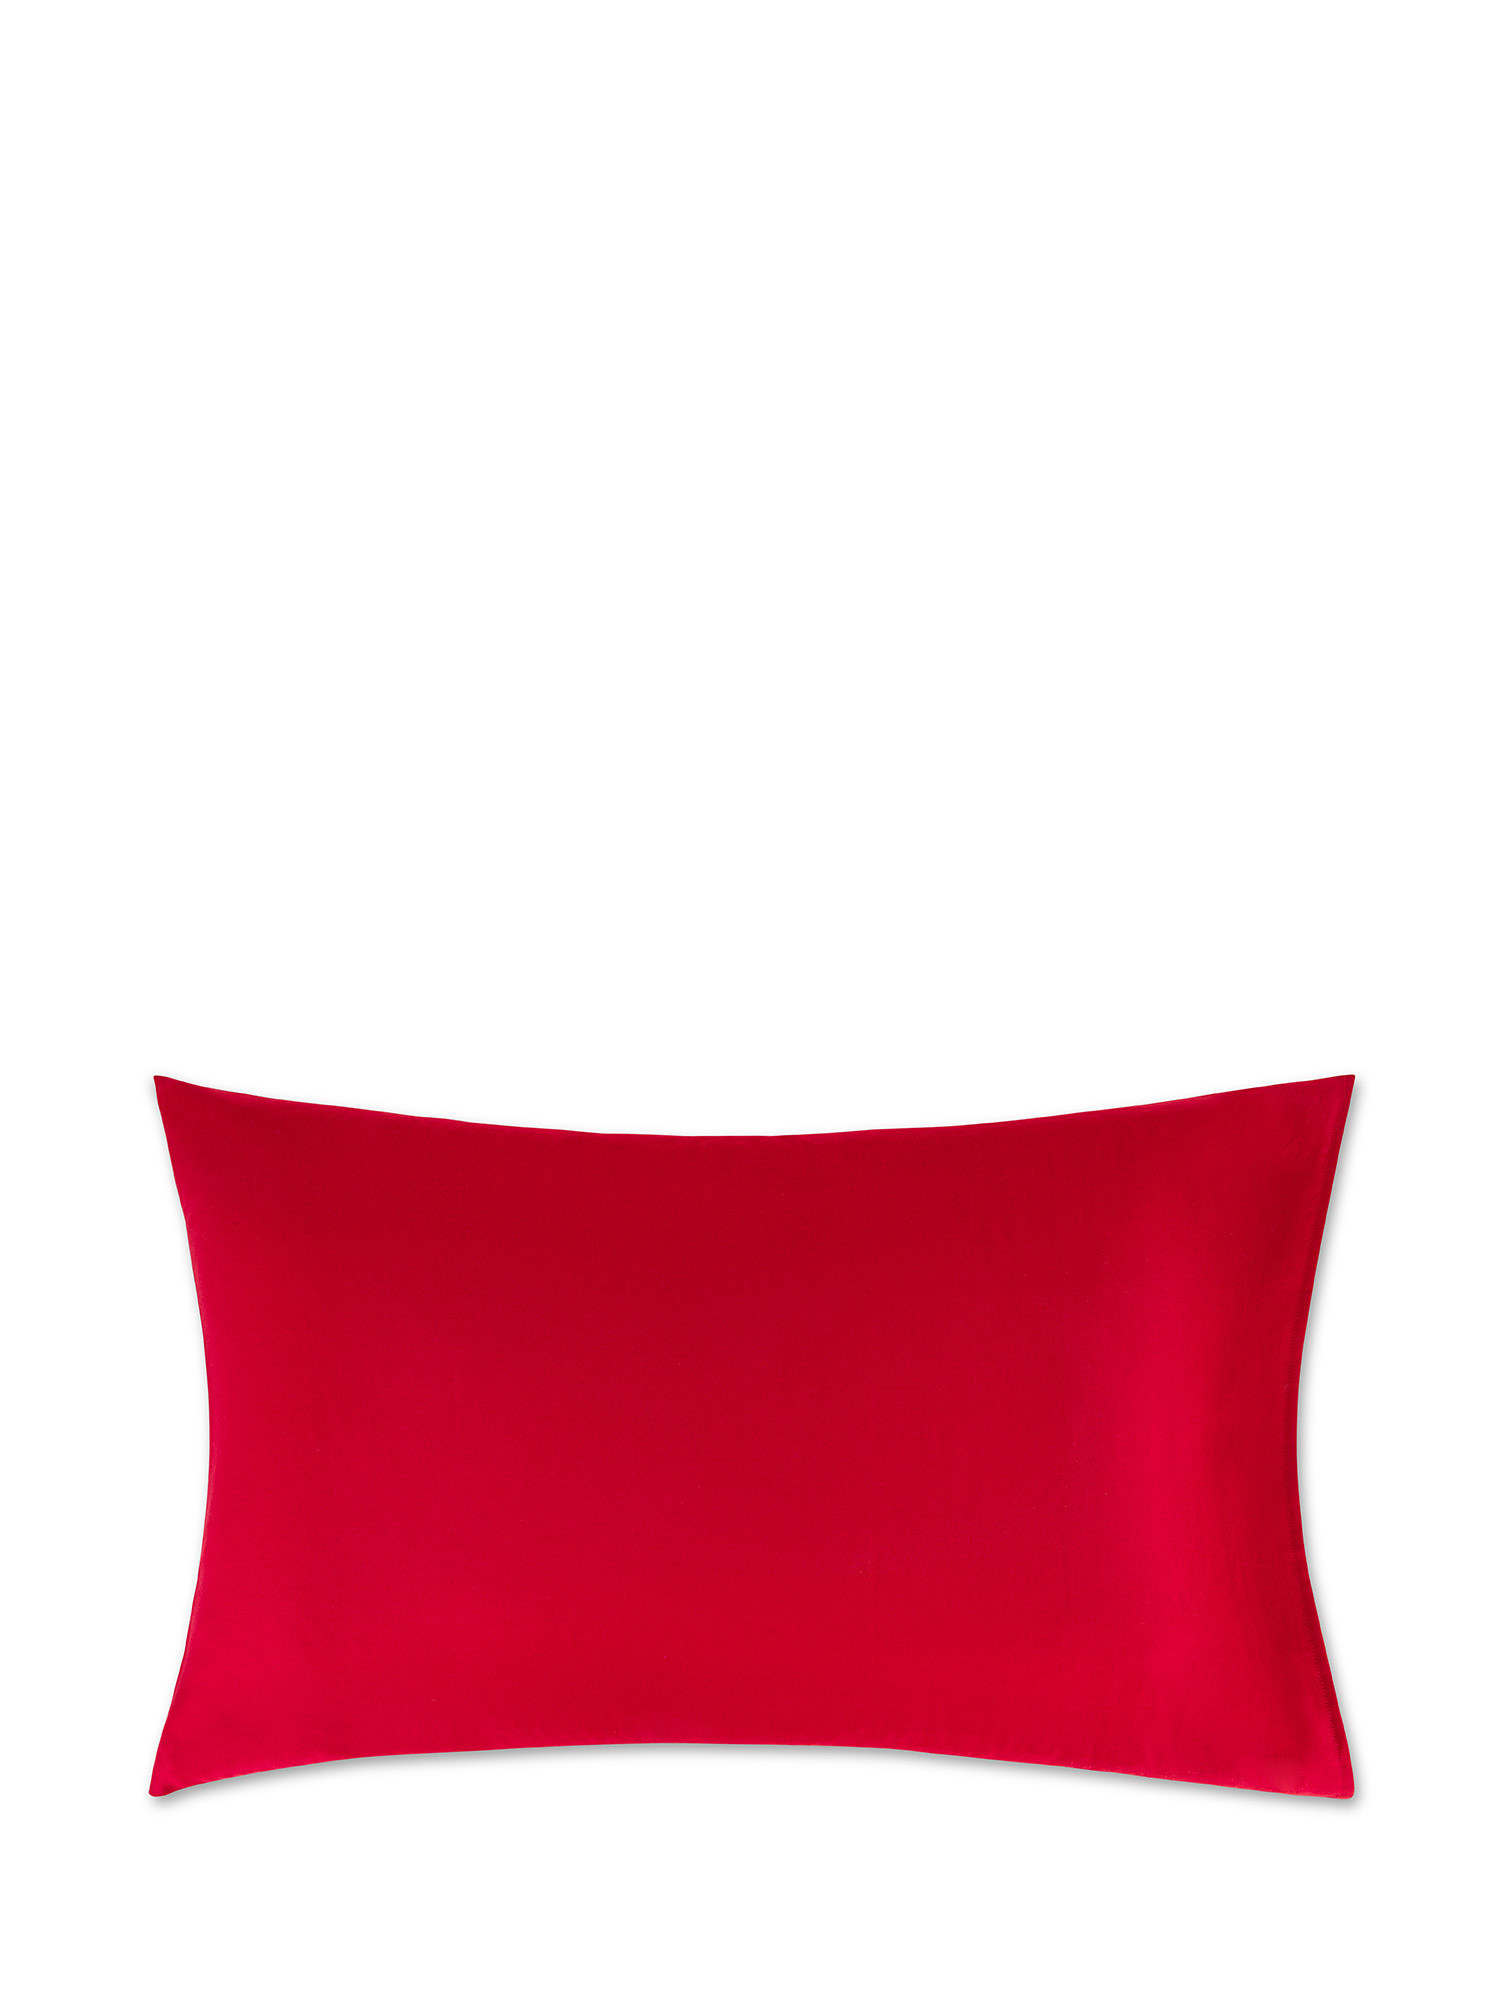 Striped cotton blend pillowcase, Red, large image number 1